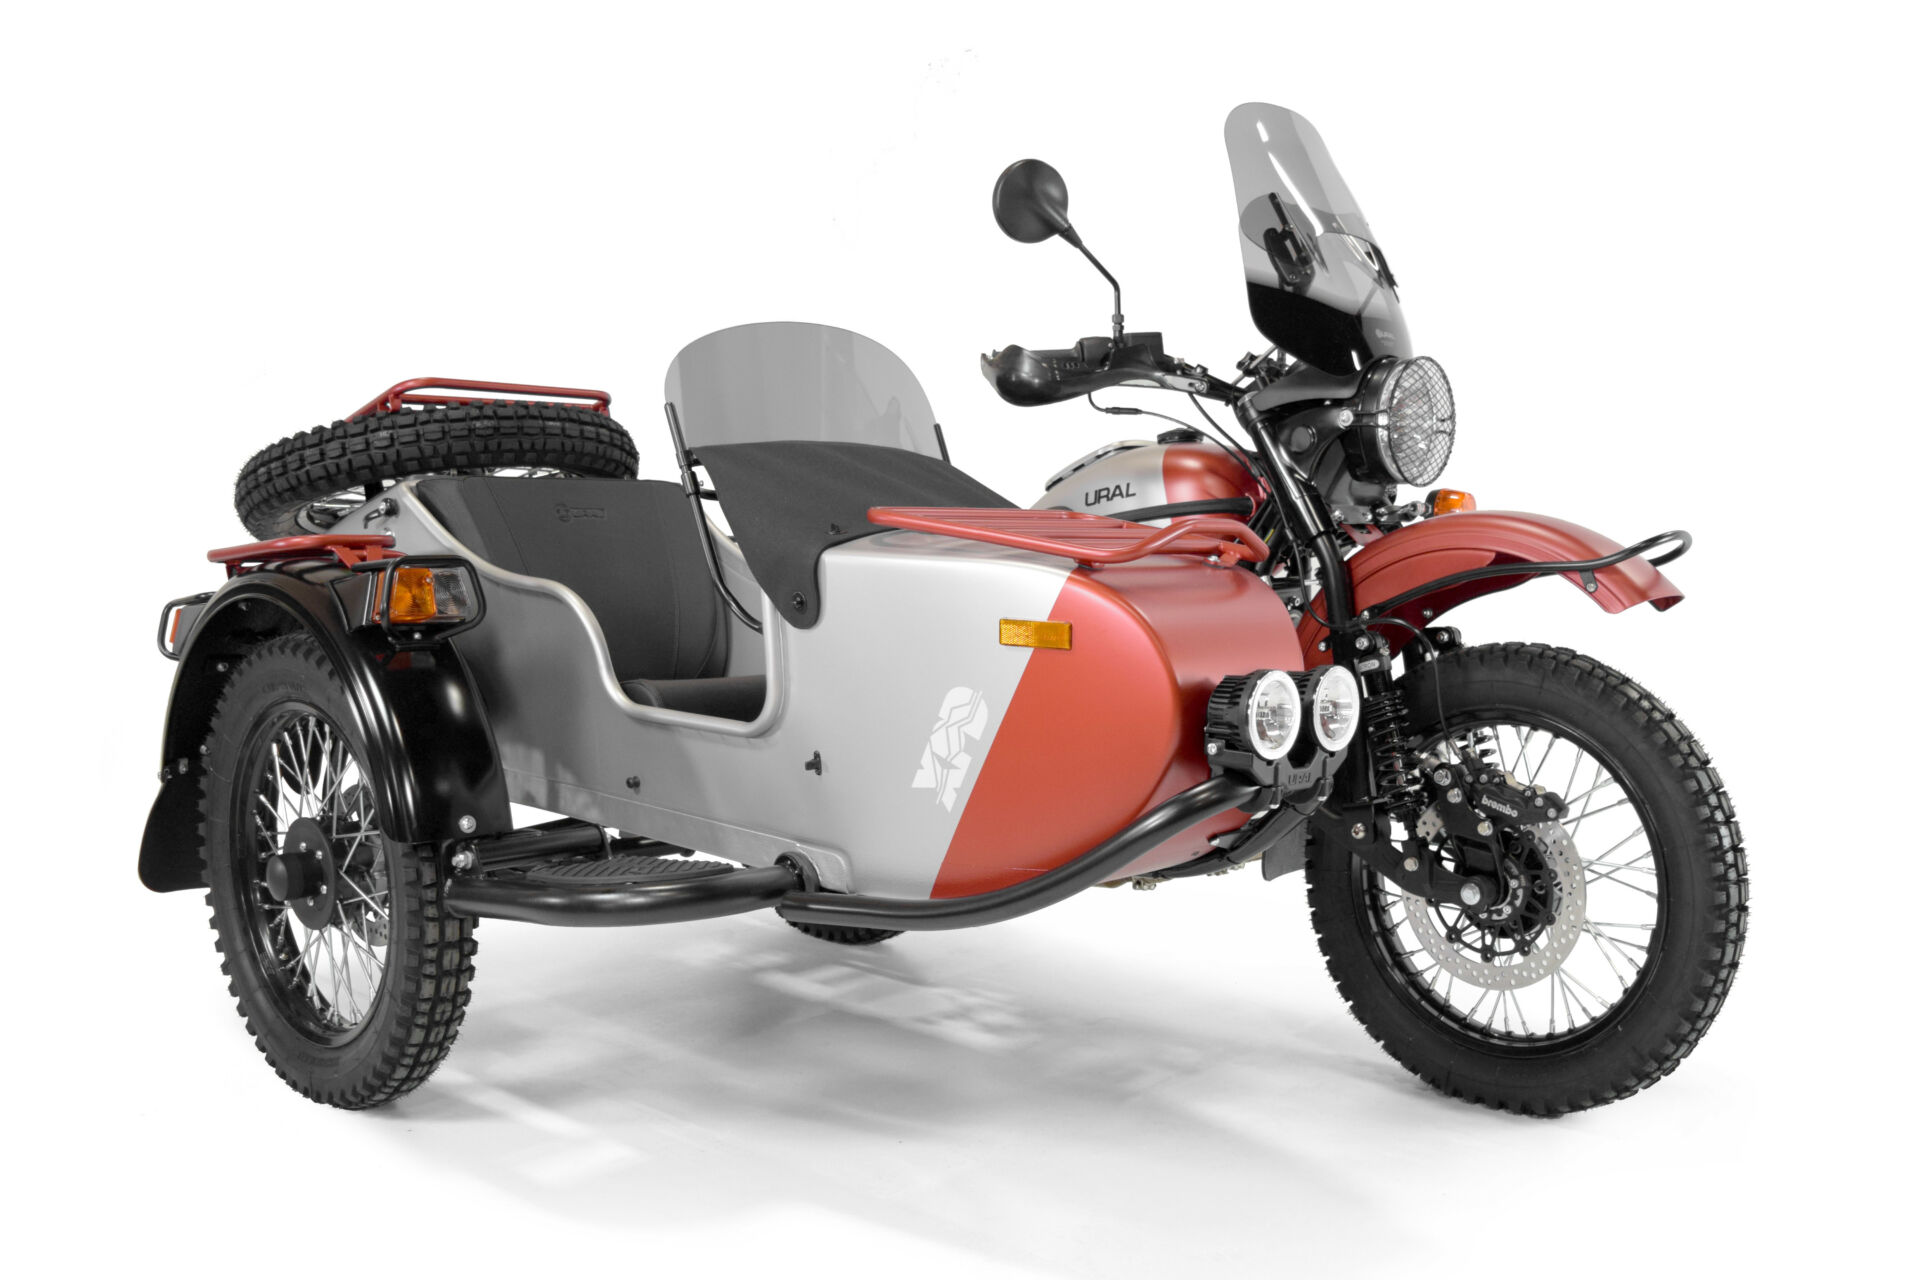 A Ural Gear Up Expedition. Photo courtesy Ural Motorcycles.